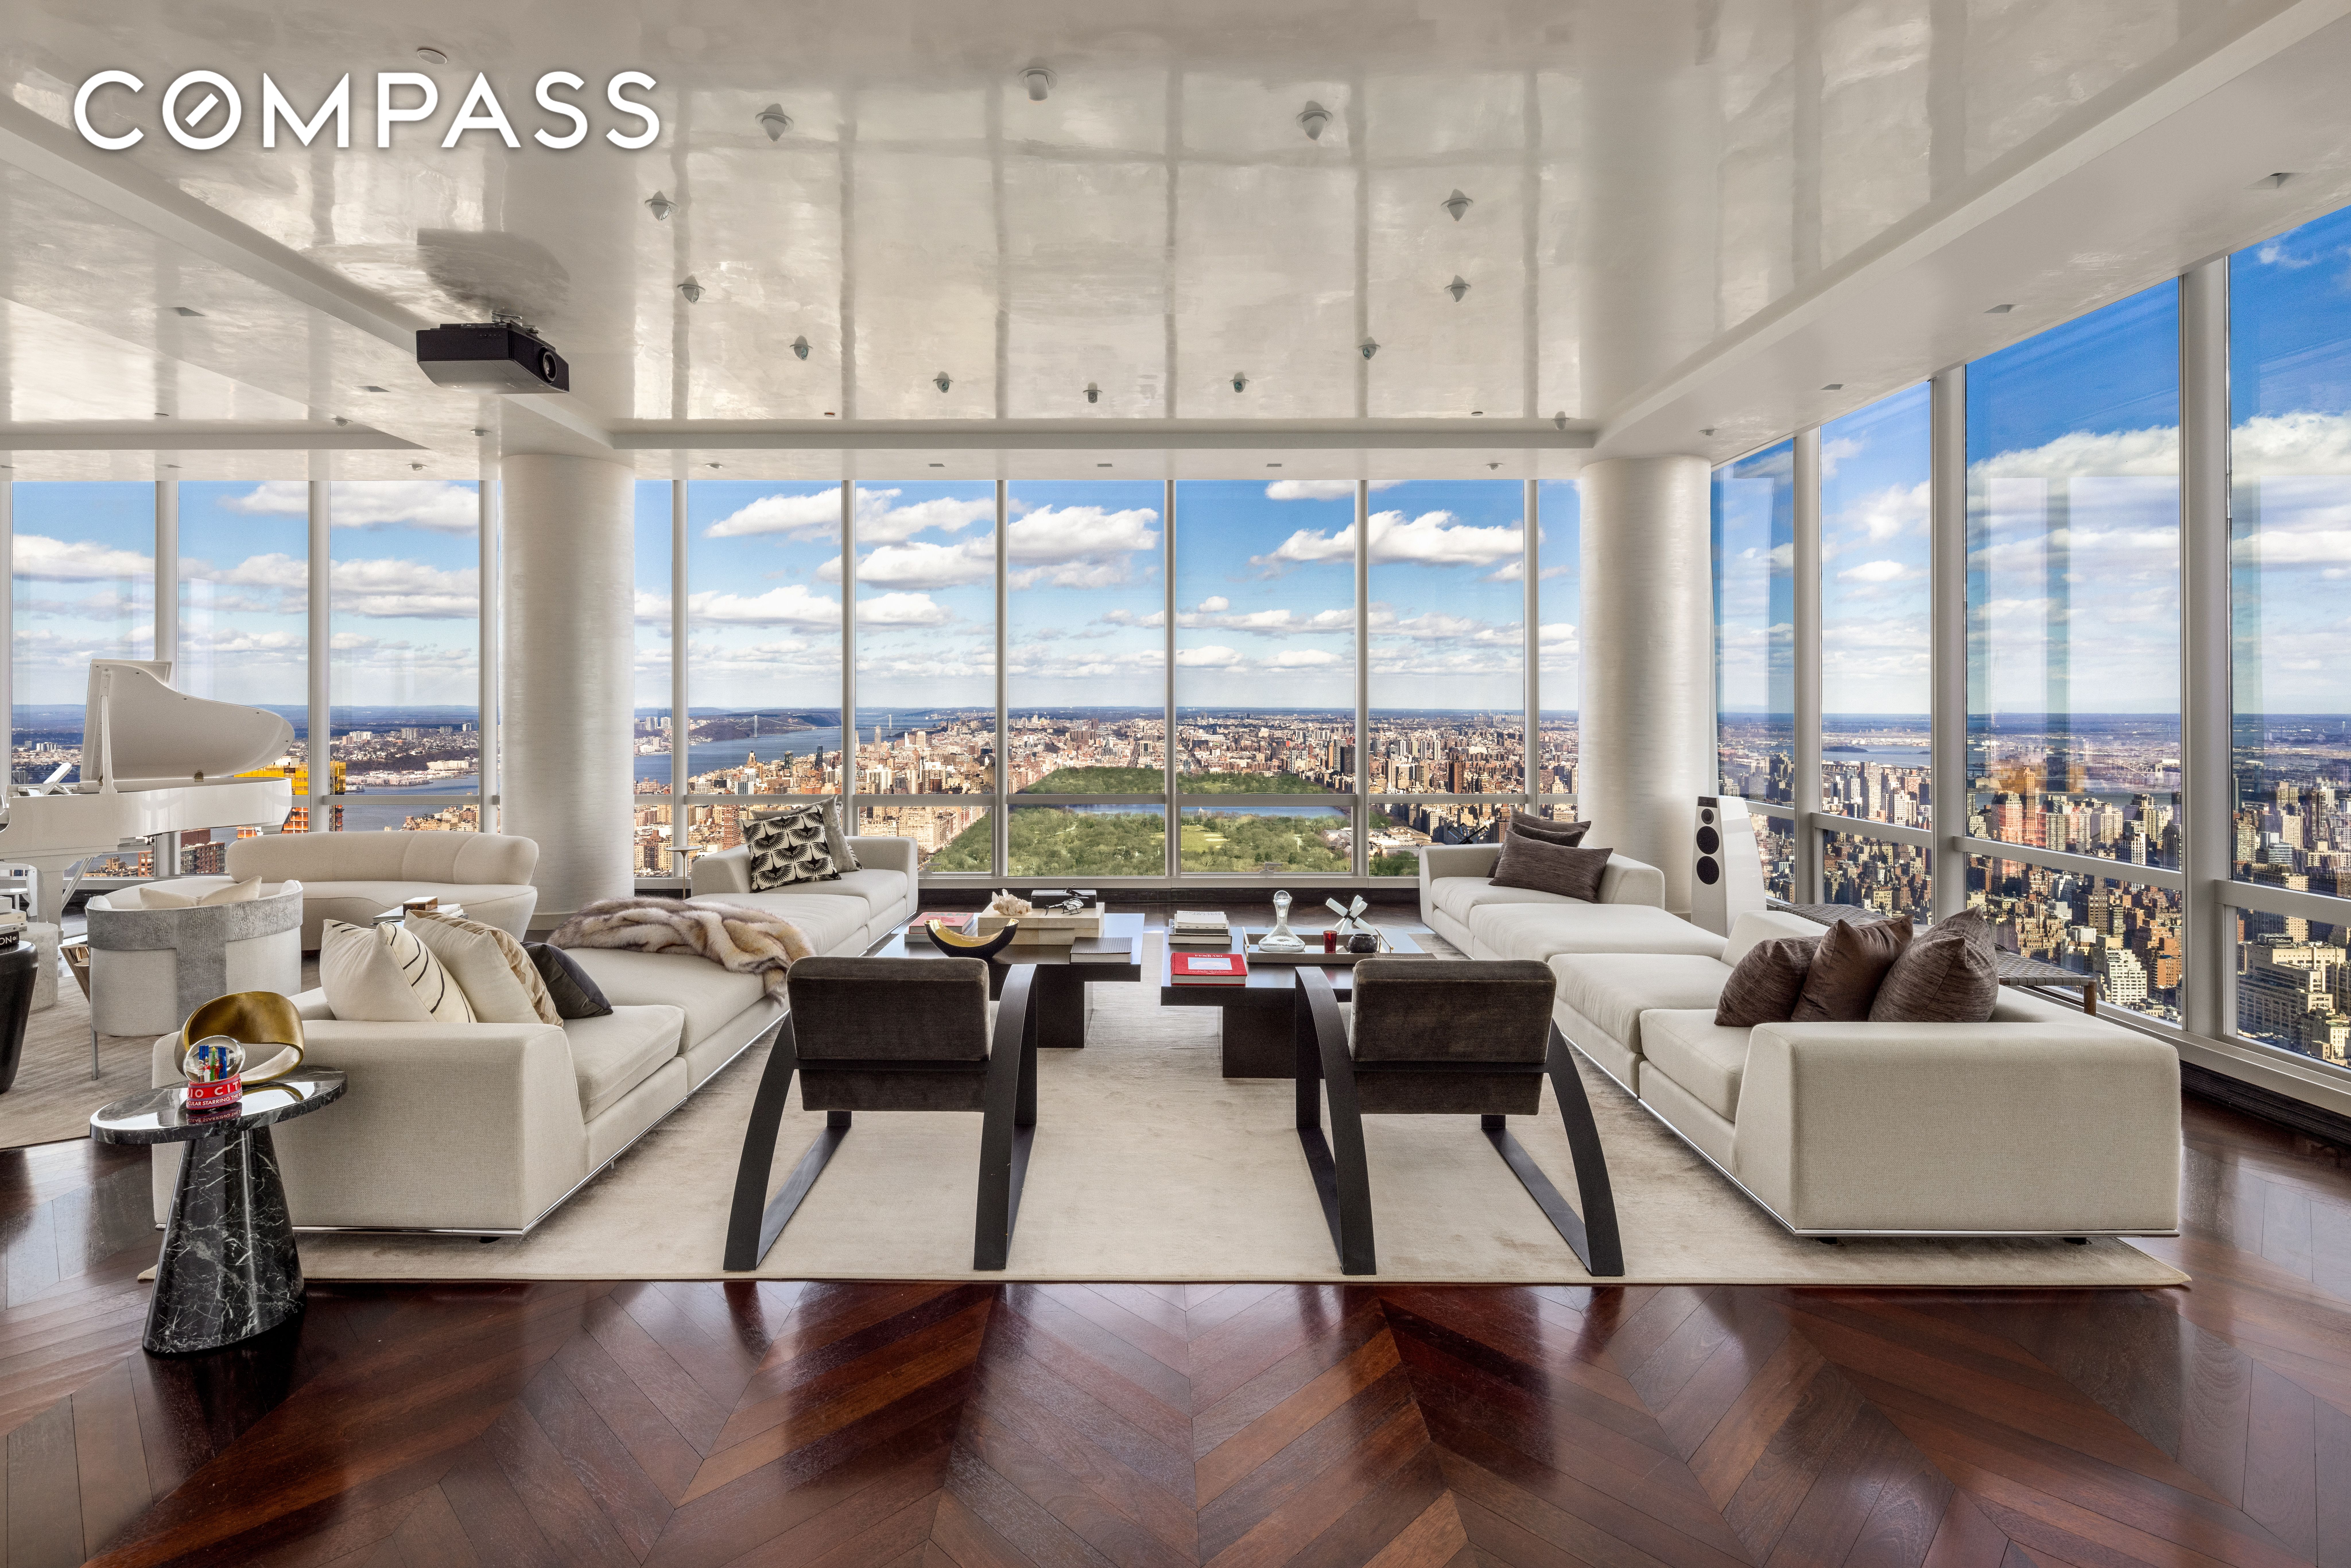 157 West 57th Street 86, Midtown Central, Midtown East, NYC - 4 Bedrooms  
5.5 Bathrooms  
7 Rooms - 